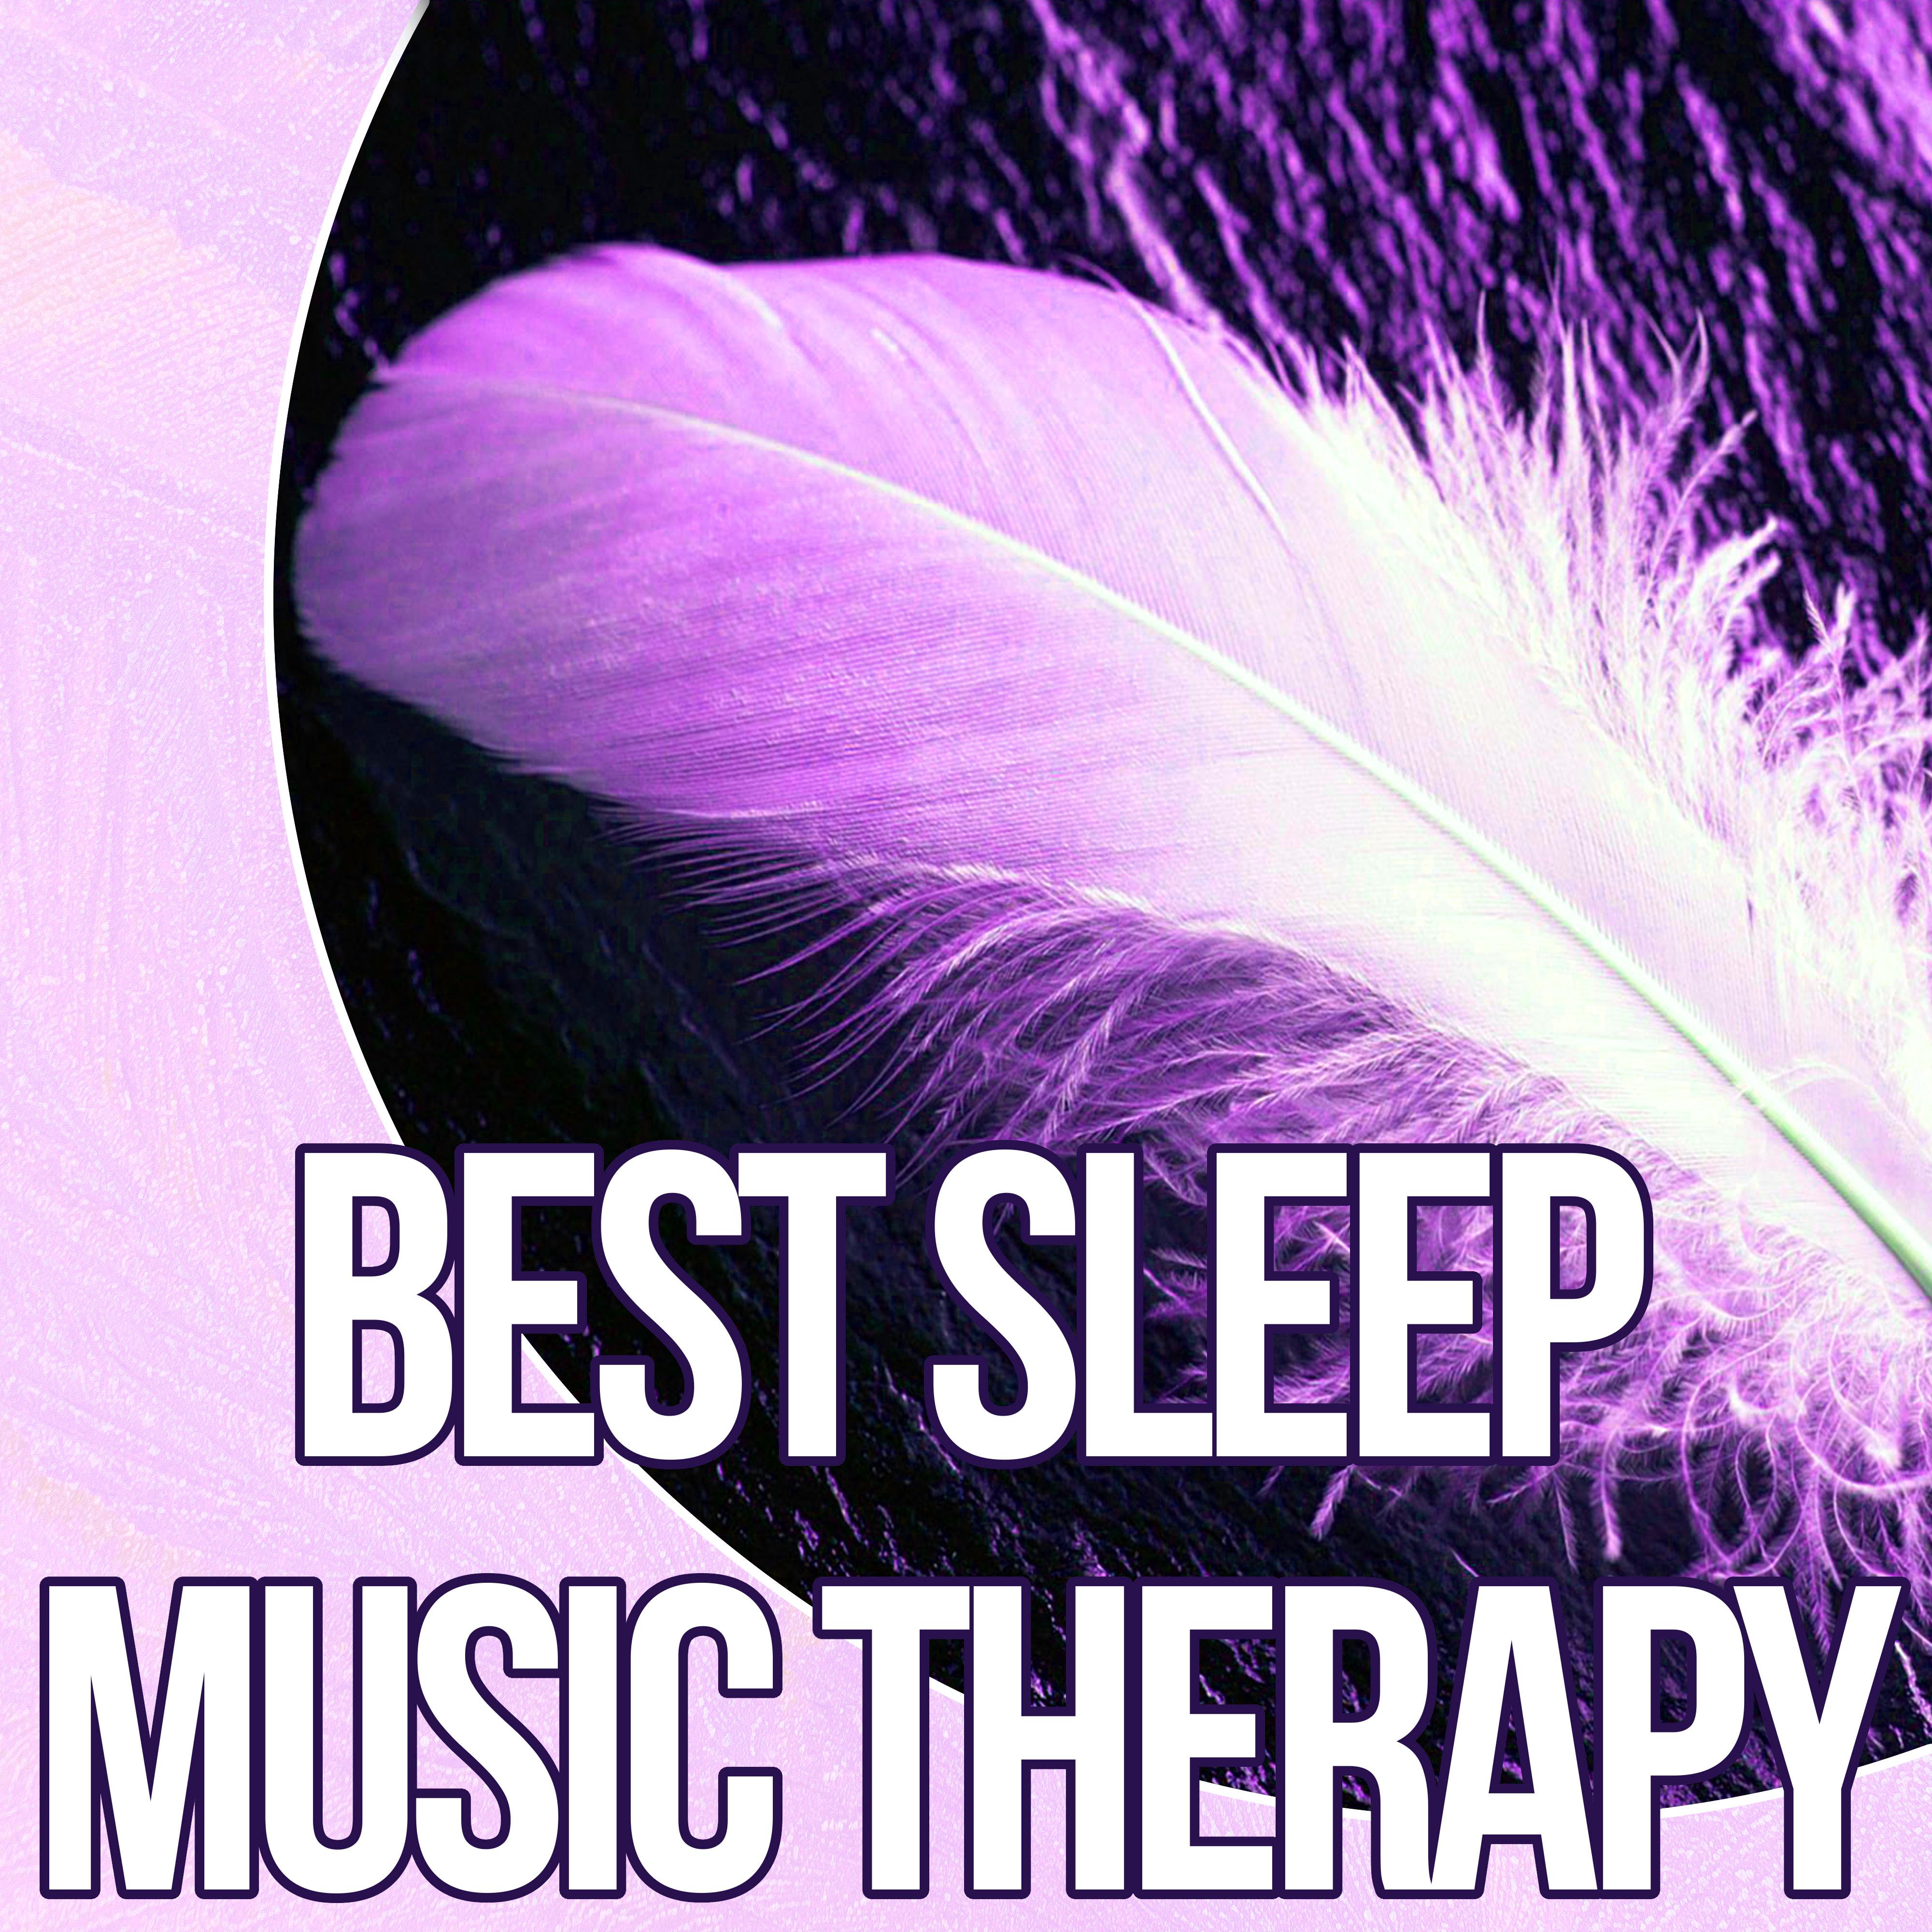 Best Sleep Music Therapy  Stress Relief, Deep Sleep and Sensual Sounds, New Age for Insomnia, Massage Healing, Relaxation  Meditation, Home Spa